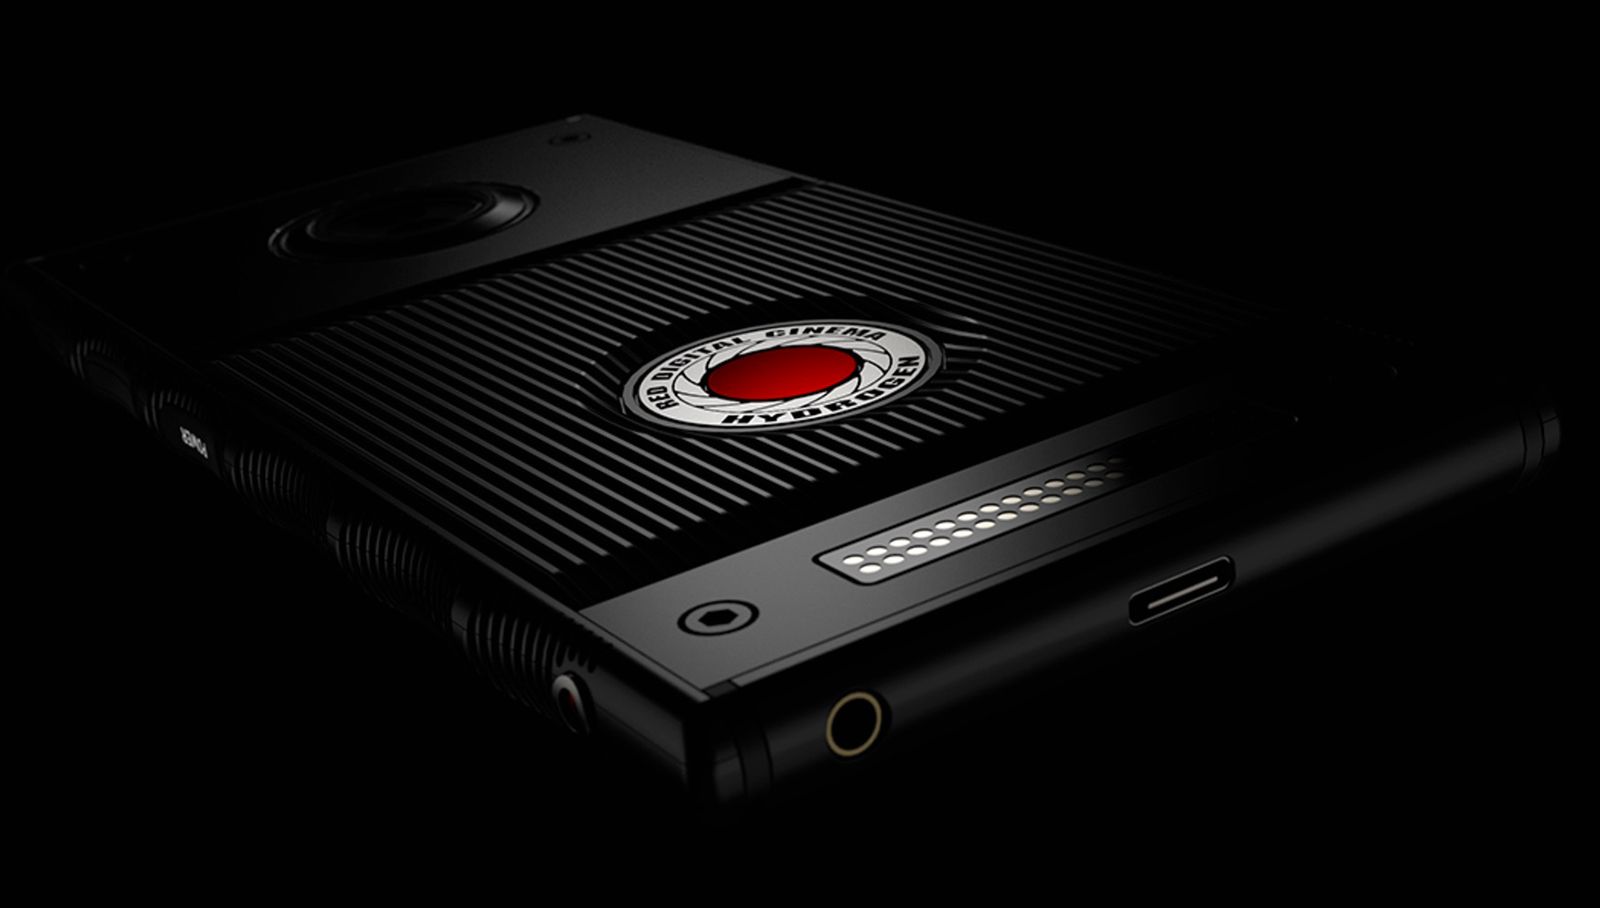 RED delays its smartphone launch says it has no idea what its doing image 1